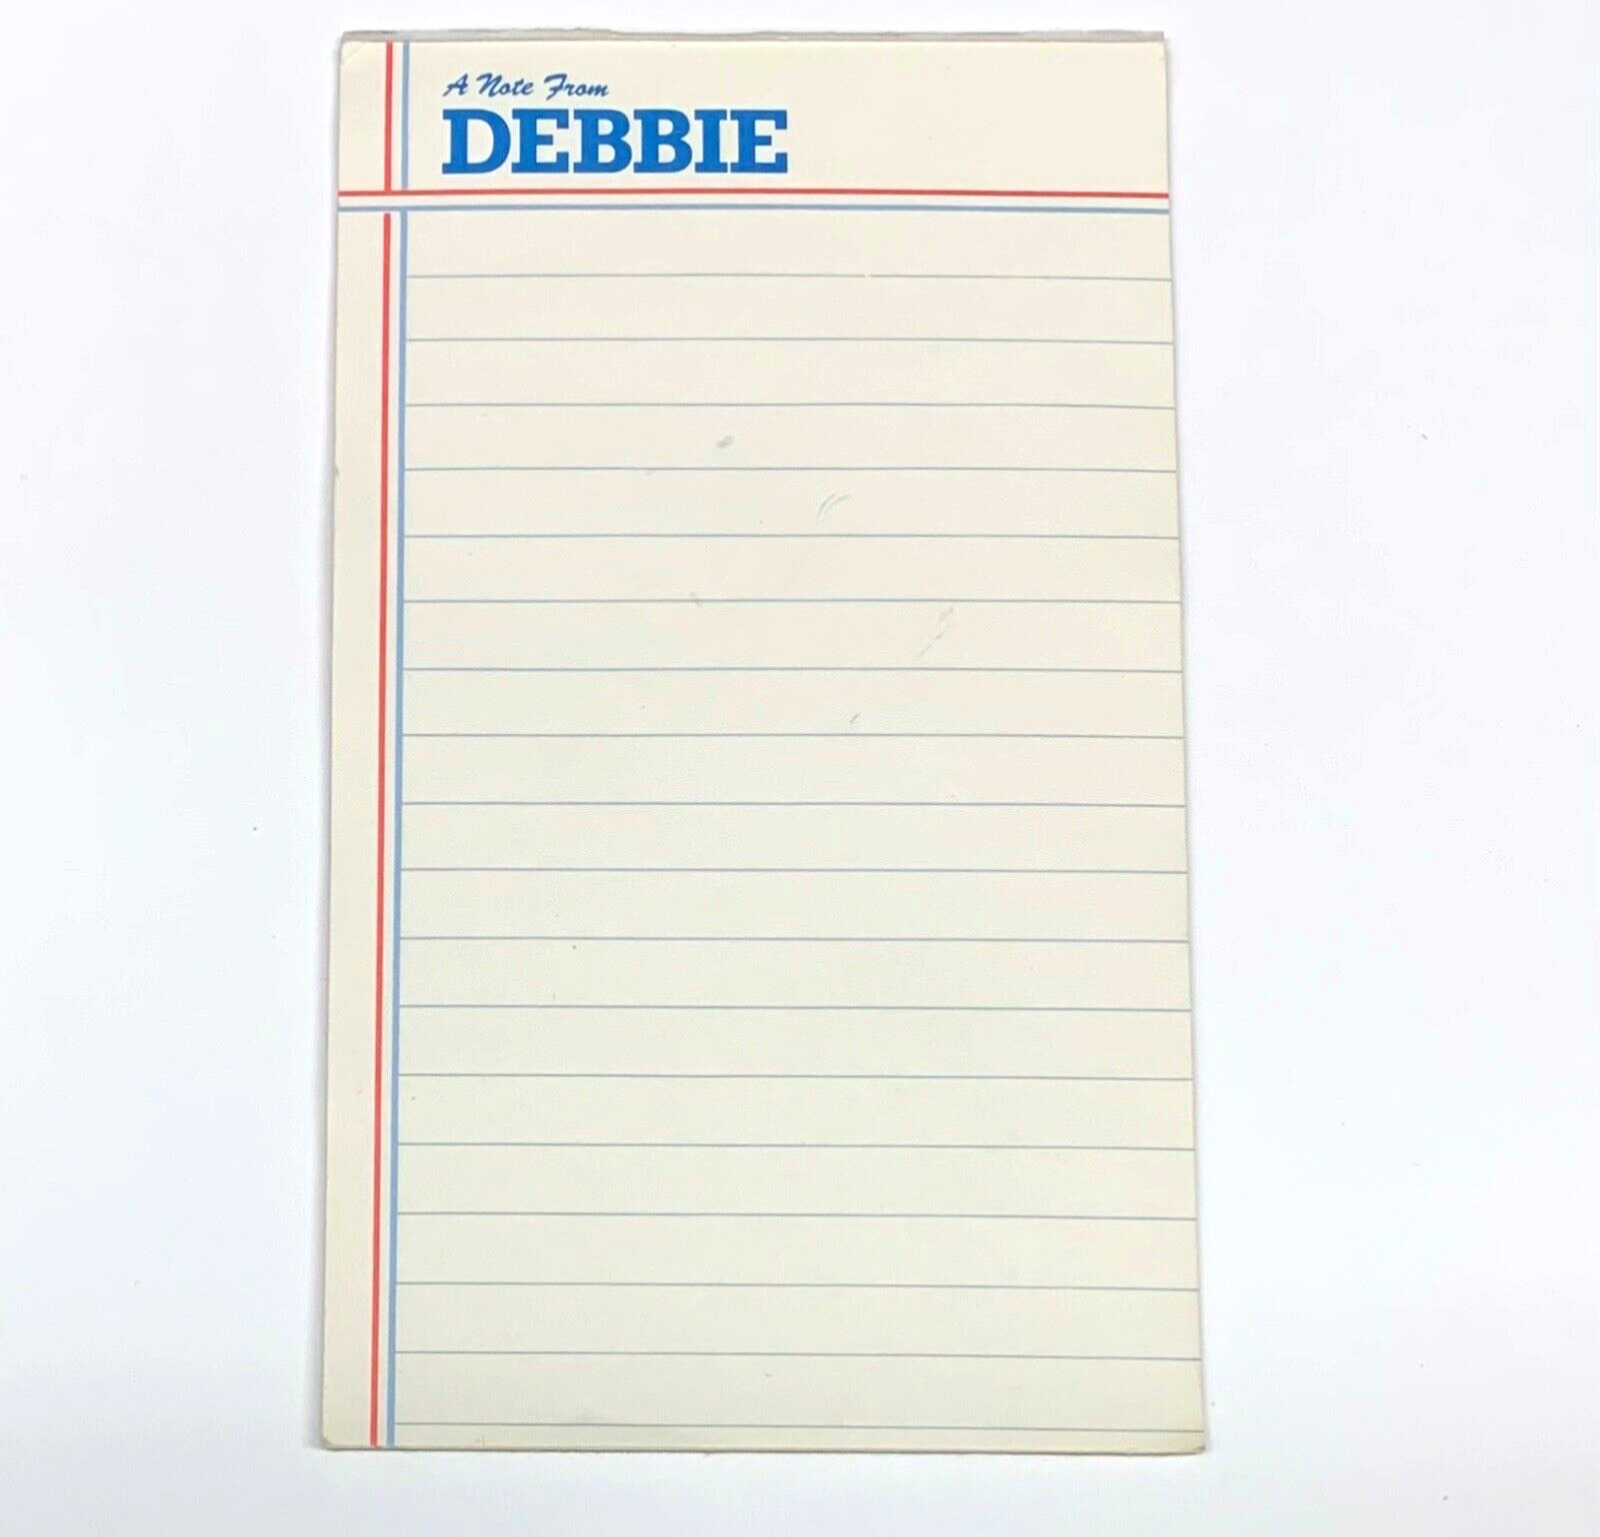 Vintage 90s A Note From DEBBIE Stationary Pad 7 Pages Left Name Personalized